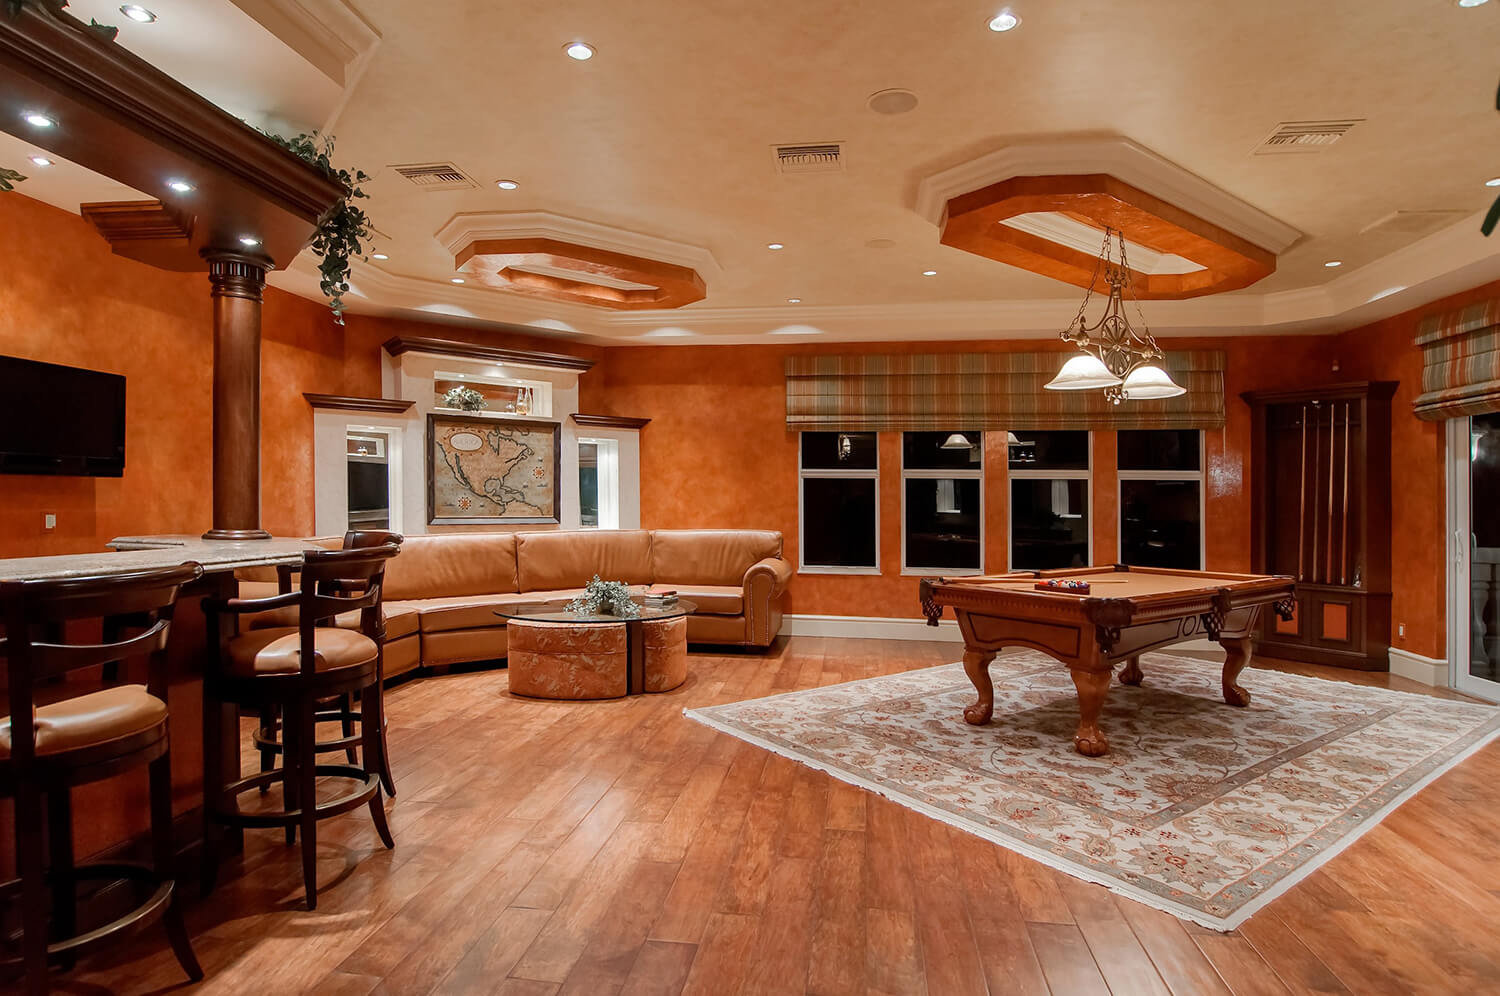 Build a custom home rather than expensive remodeling throughout the years